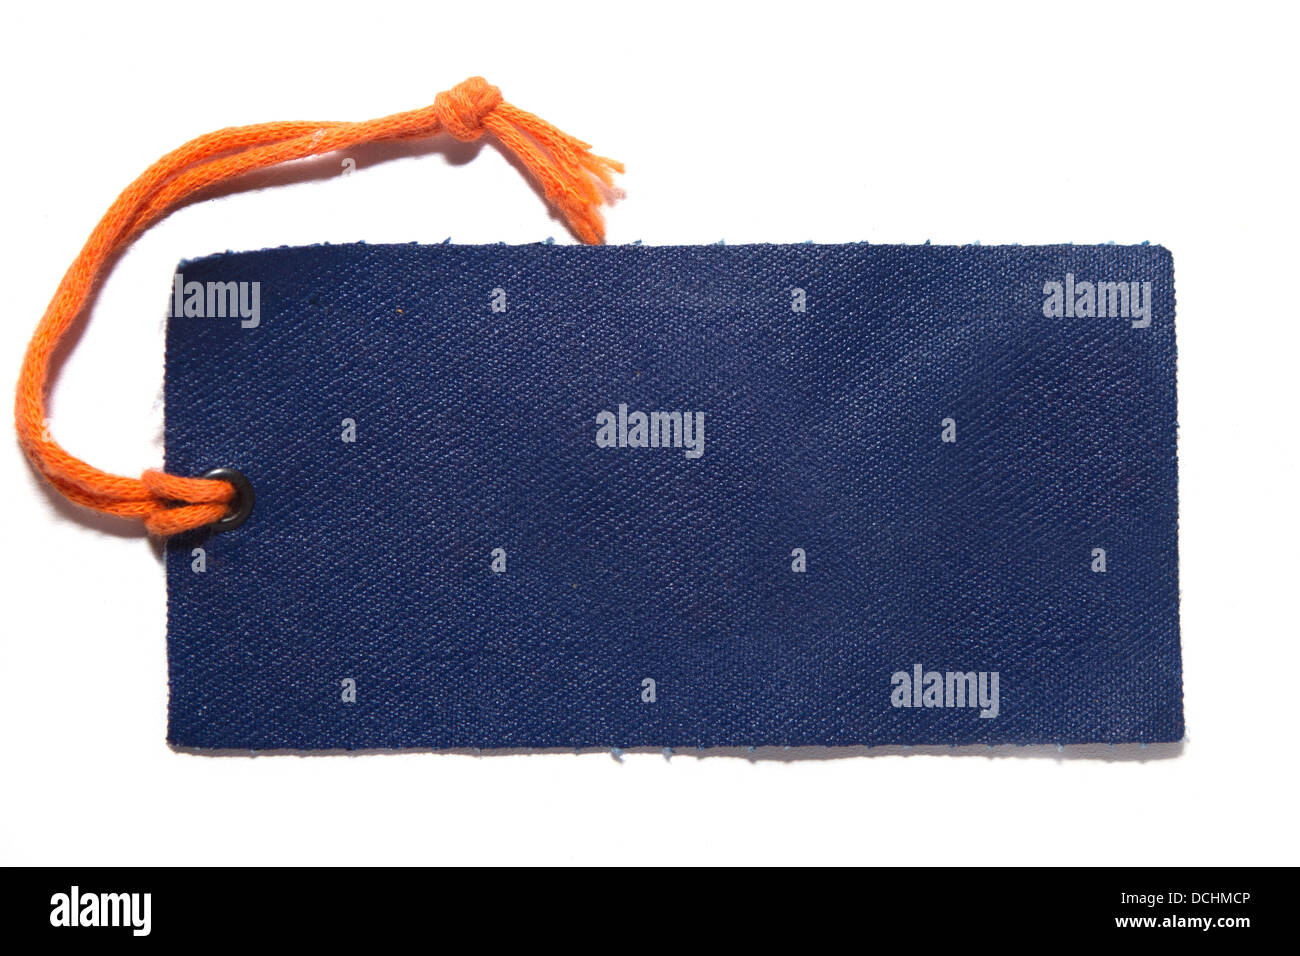 Denim cloth label with orange thread on white with visible shadow Stock Photo